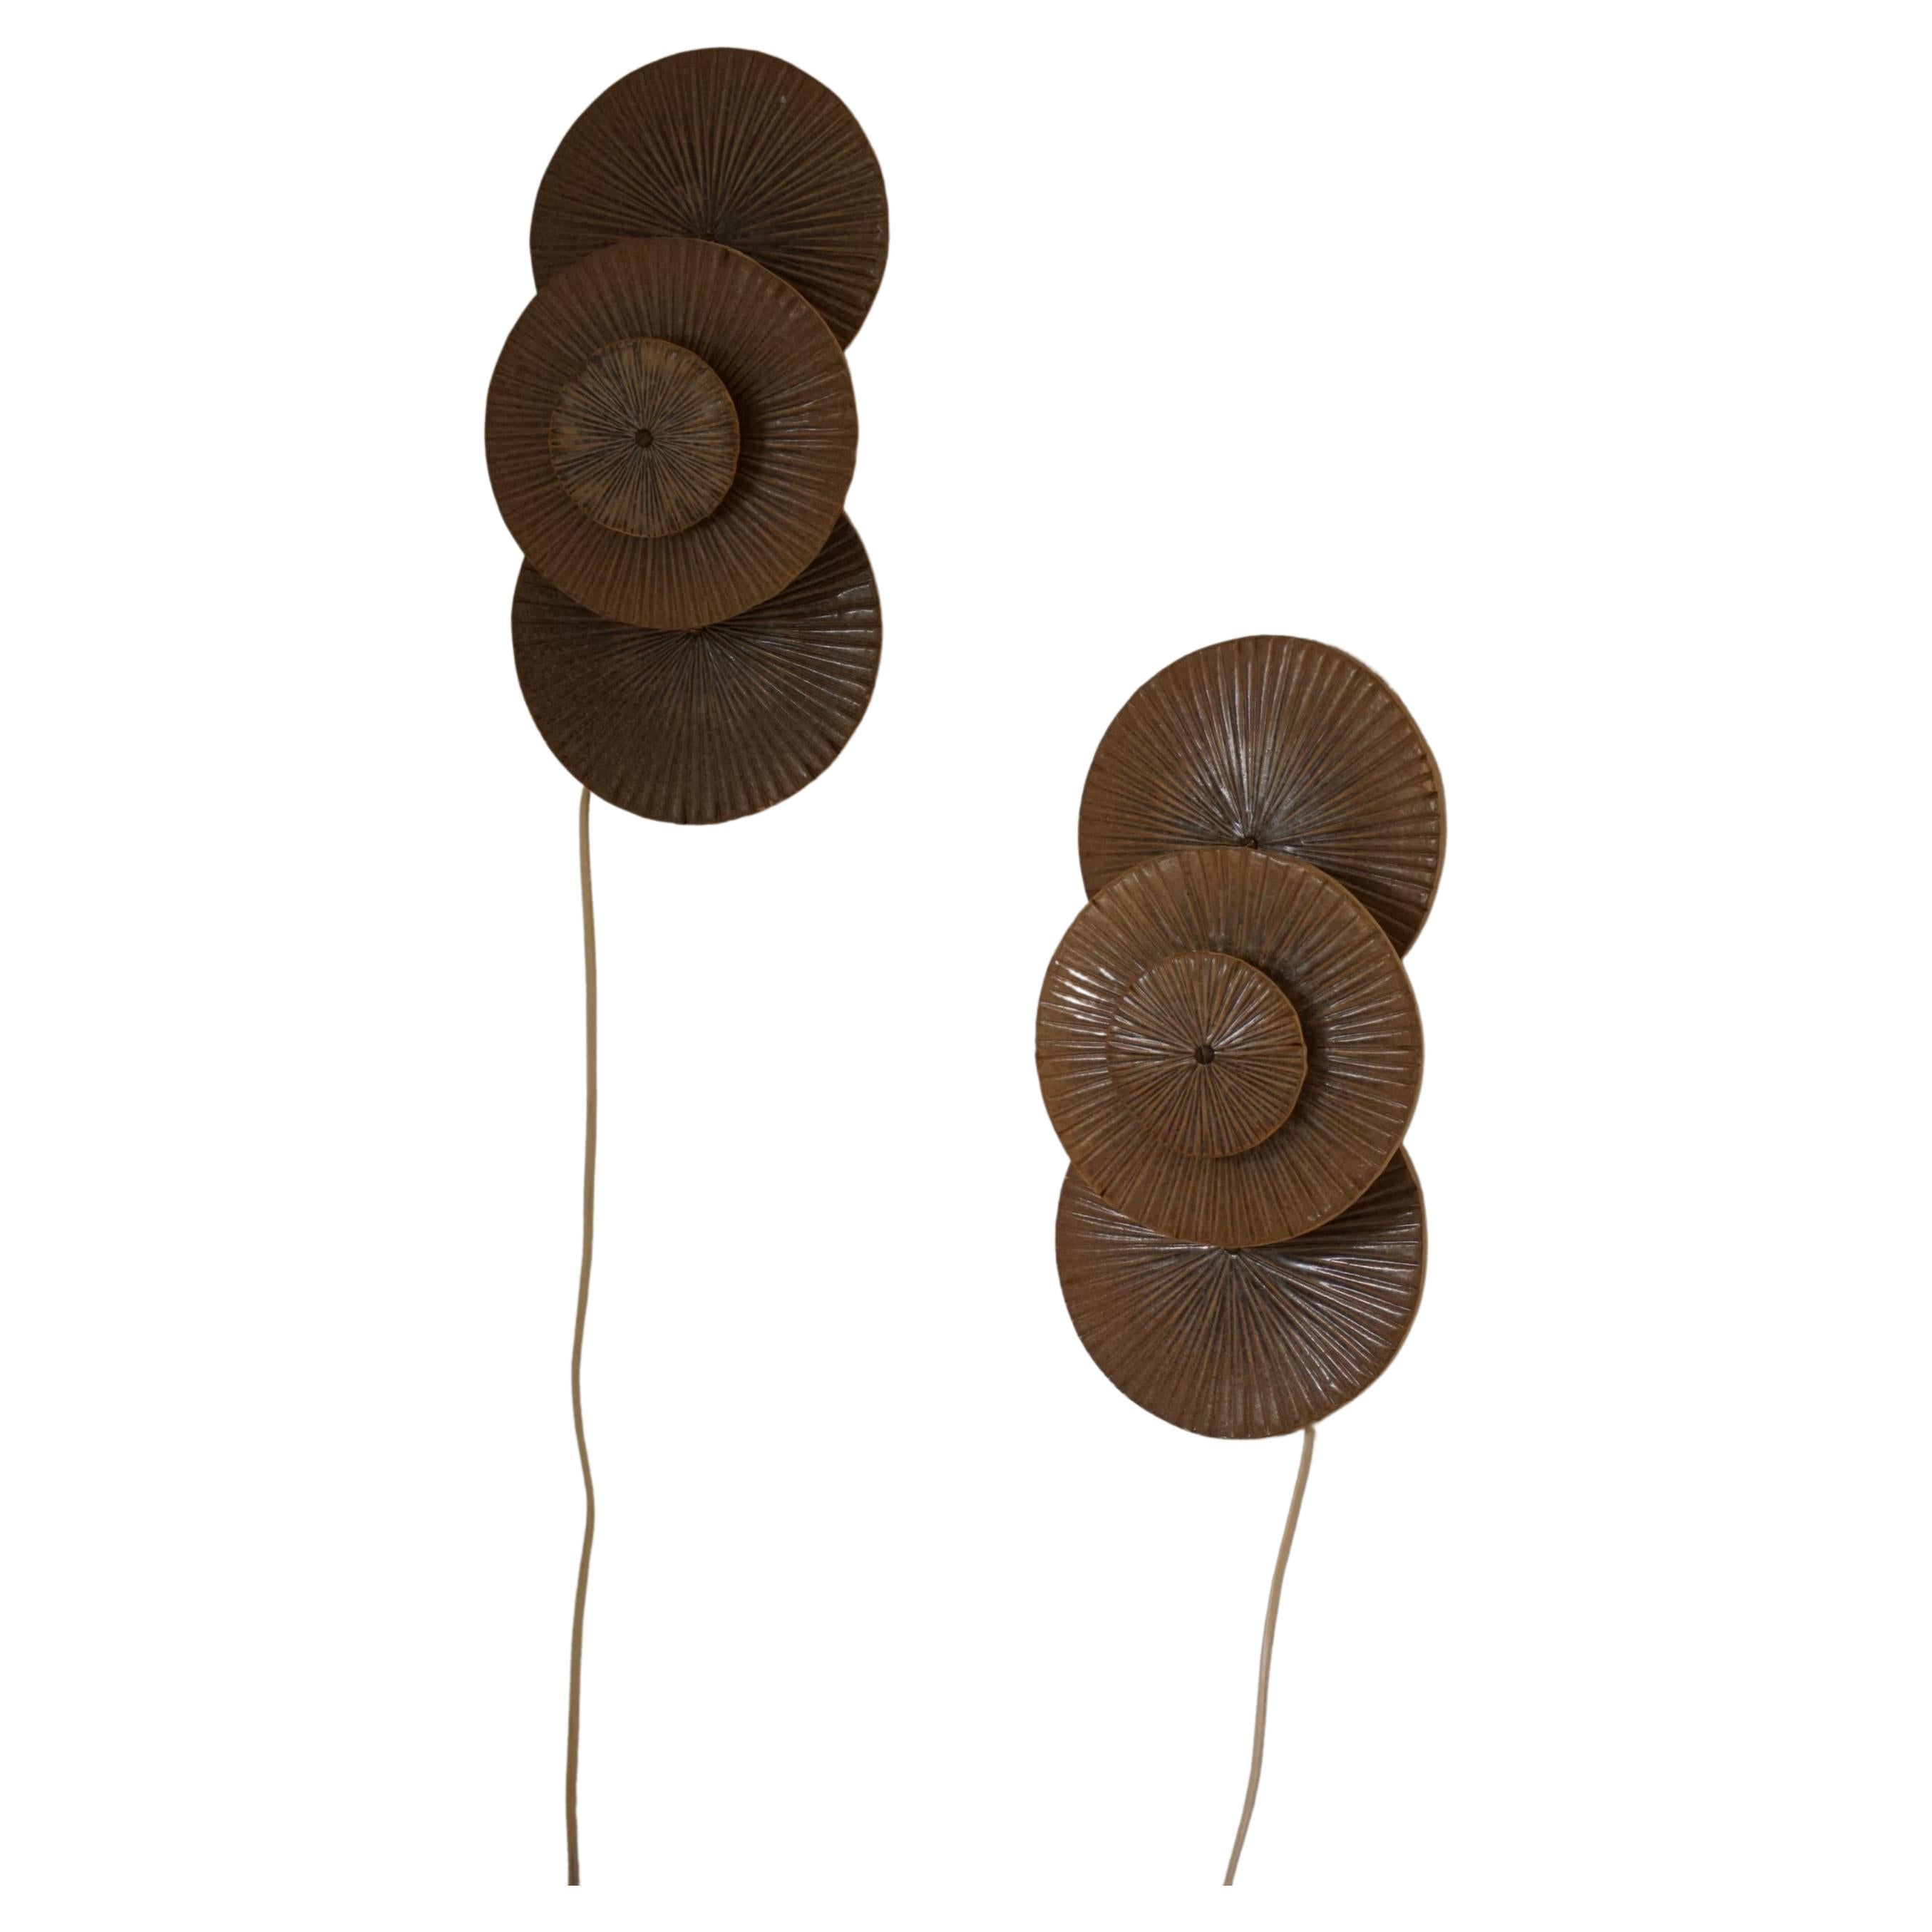 Danish Modern Pair of Ceramic Wall Sconces, Made by Axella, 1970s